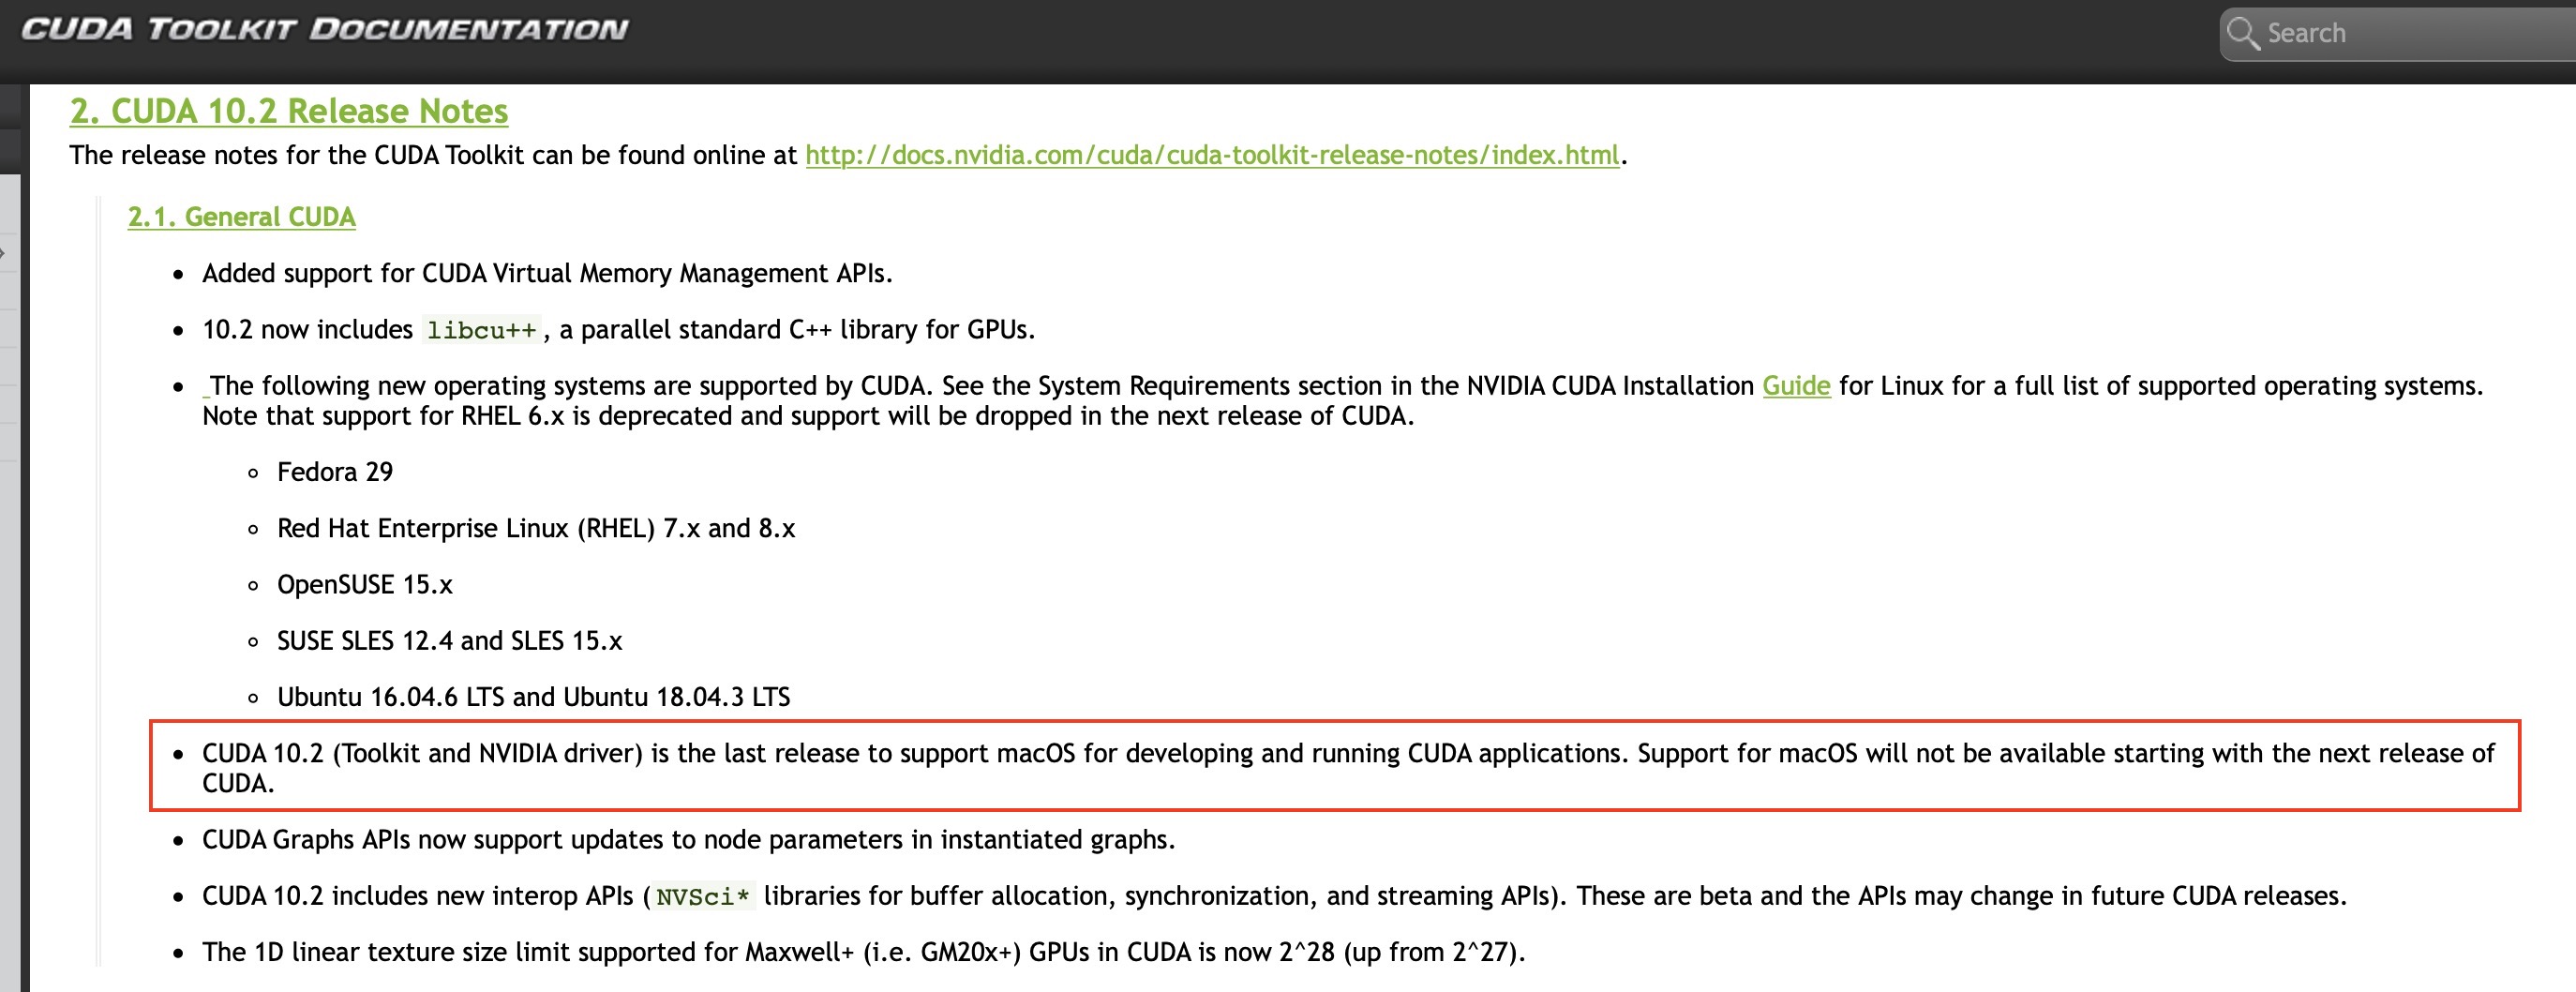 Officially official: NVIDIA drops CUDA support for macOS 11